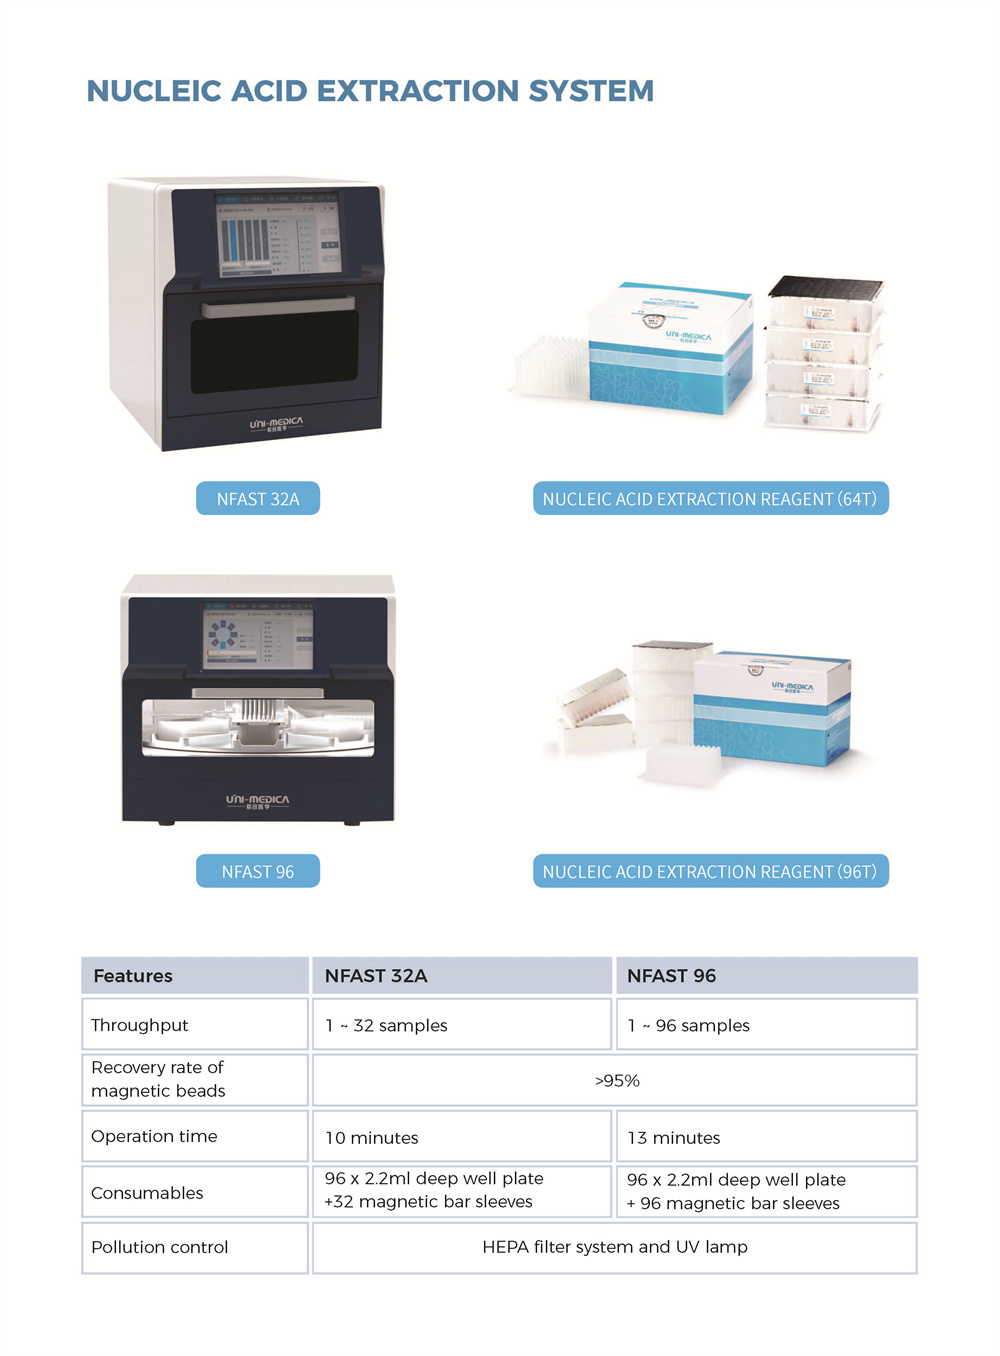 NUCLEIC ACID EXTRACTION SYSTEM R1_2